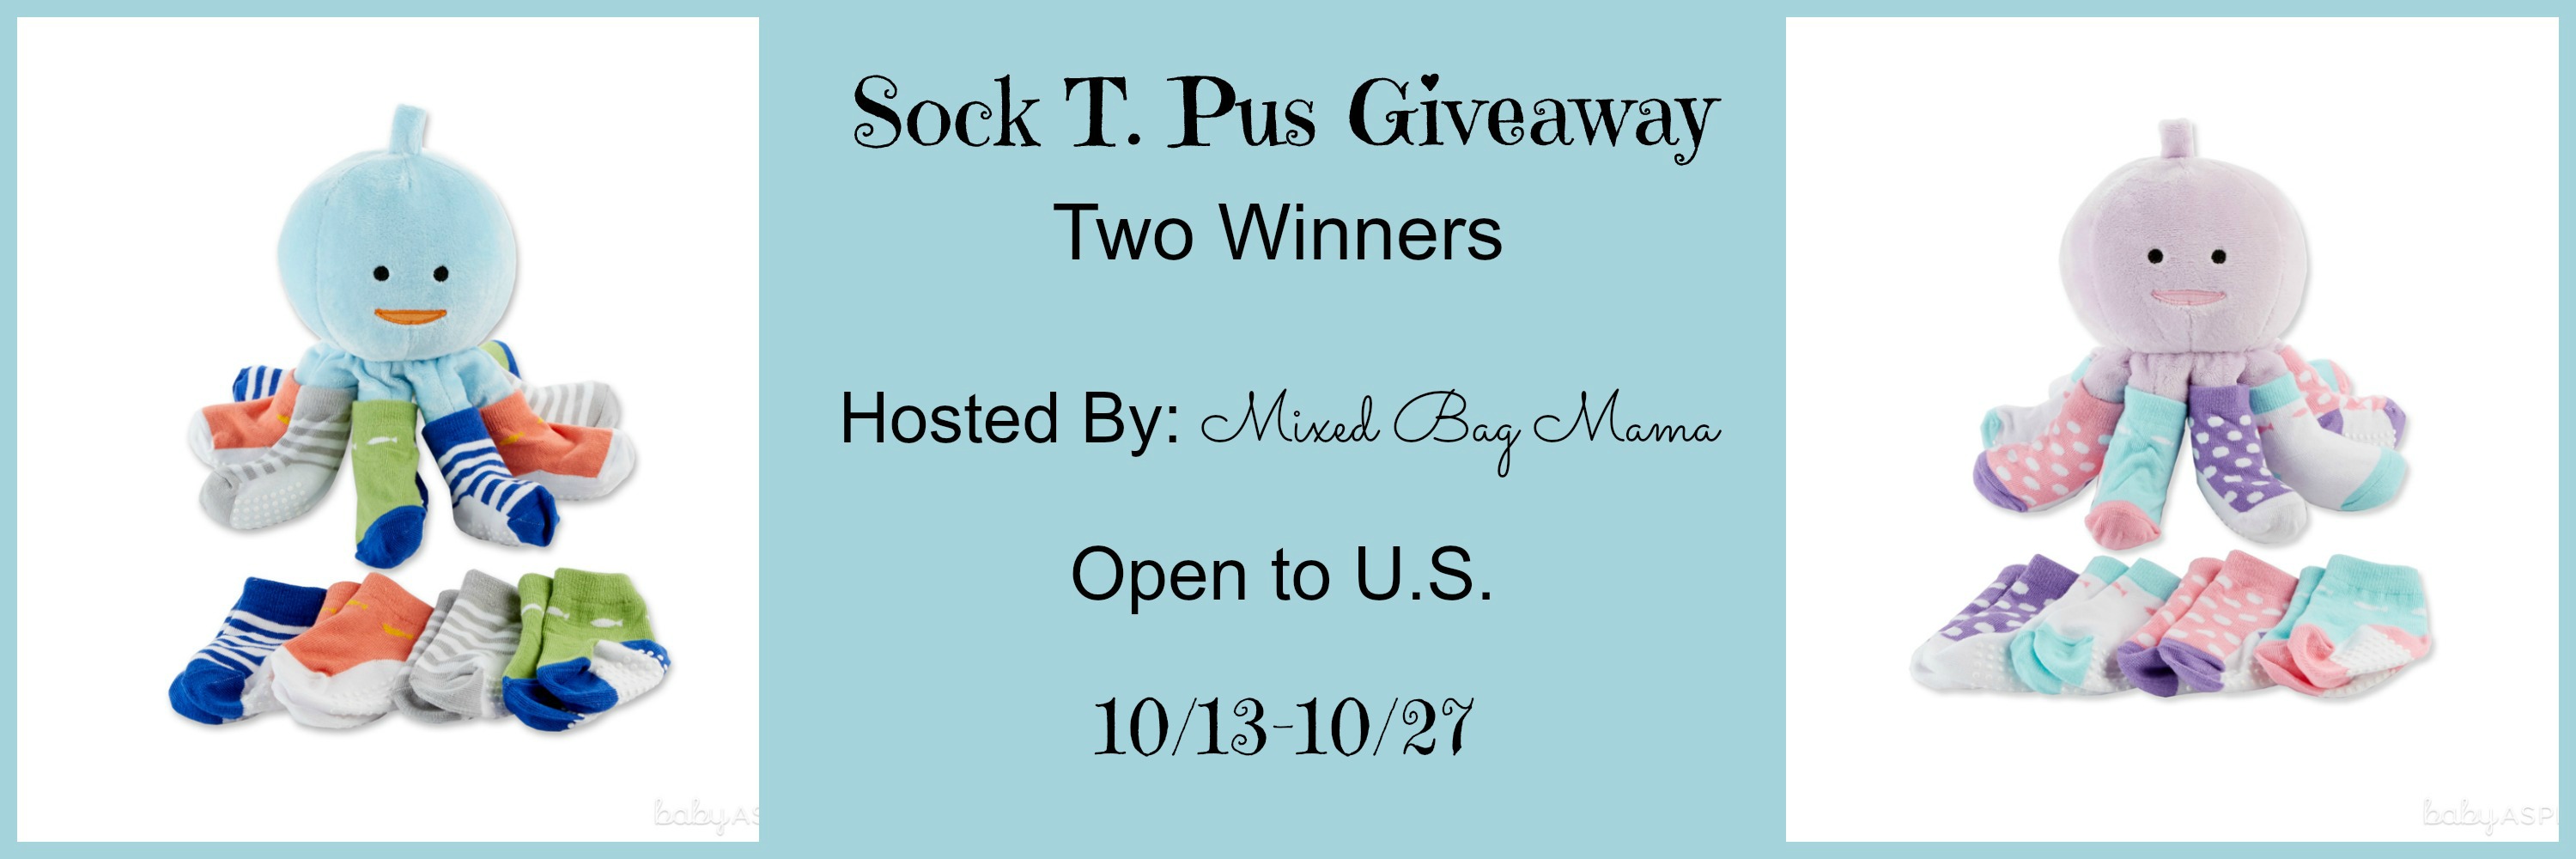 Enter to win the Sock. T Pus (10/13-10/27)